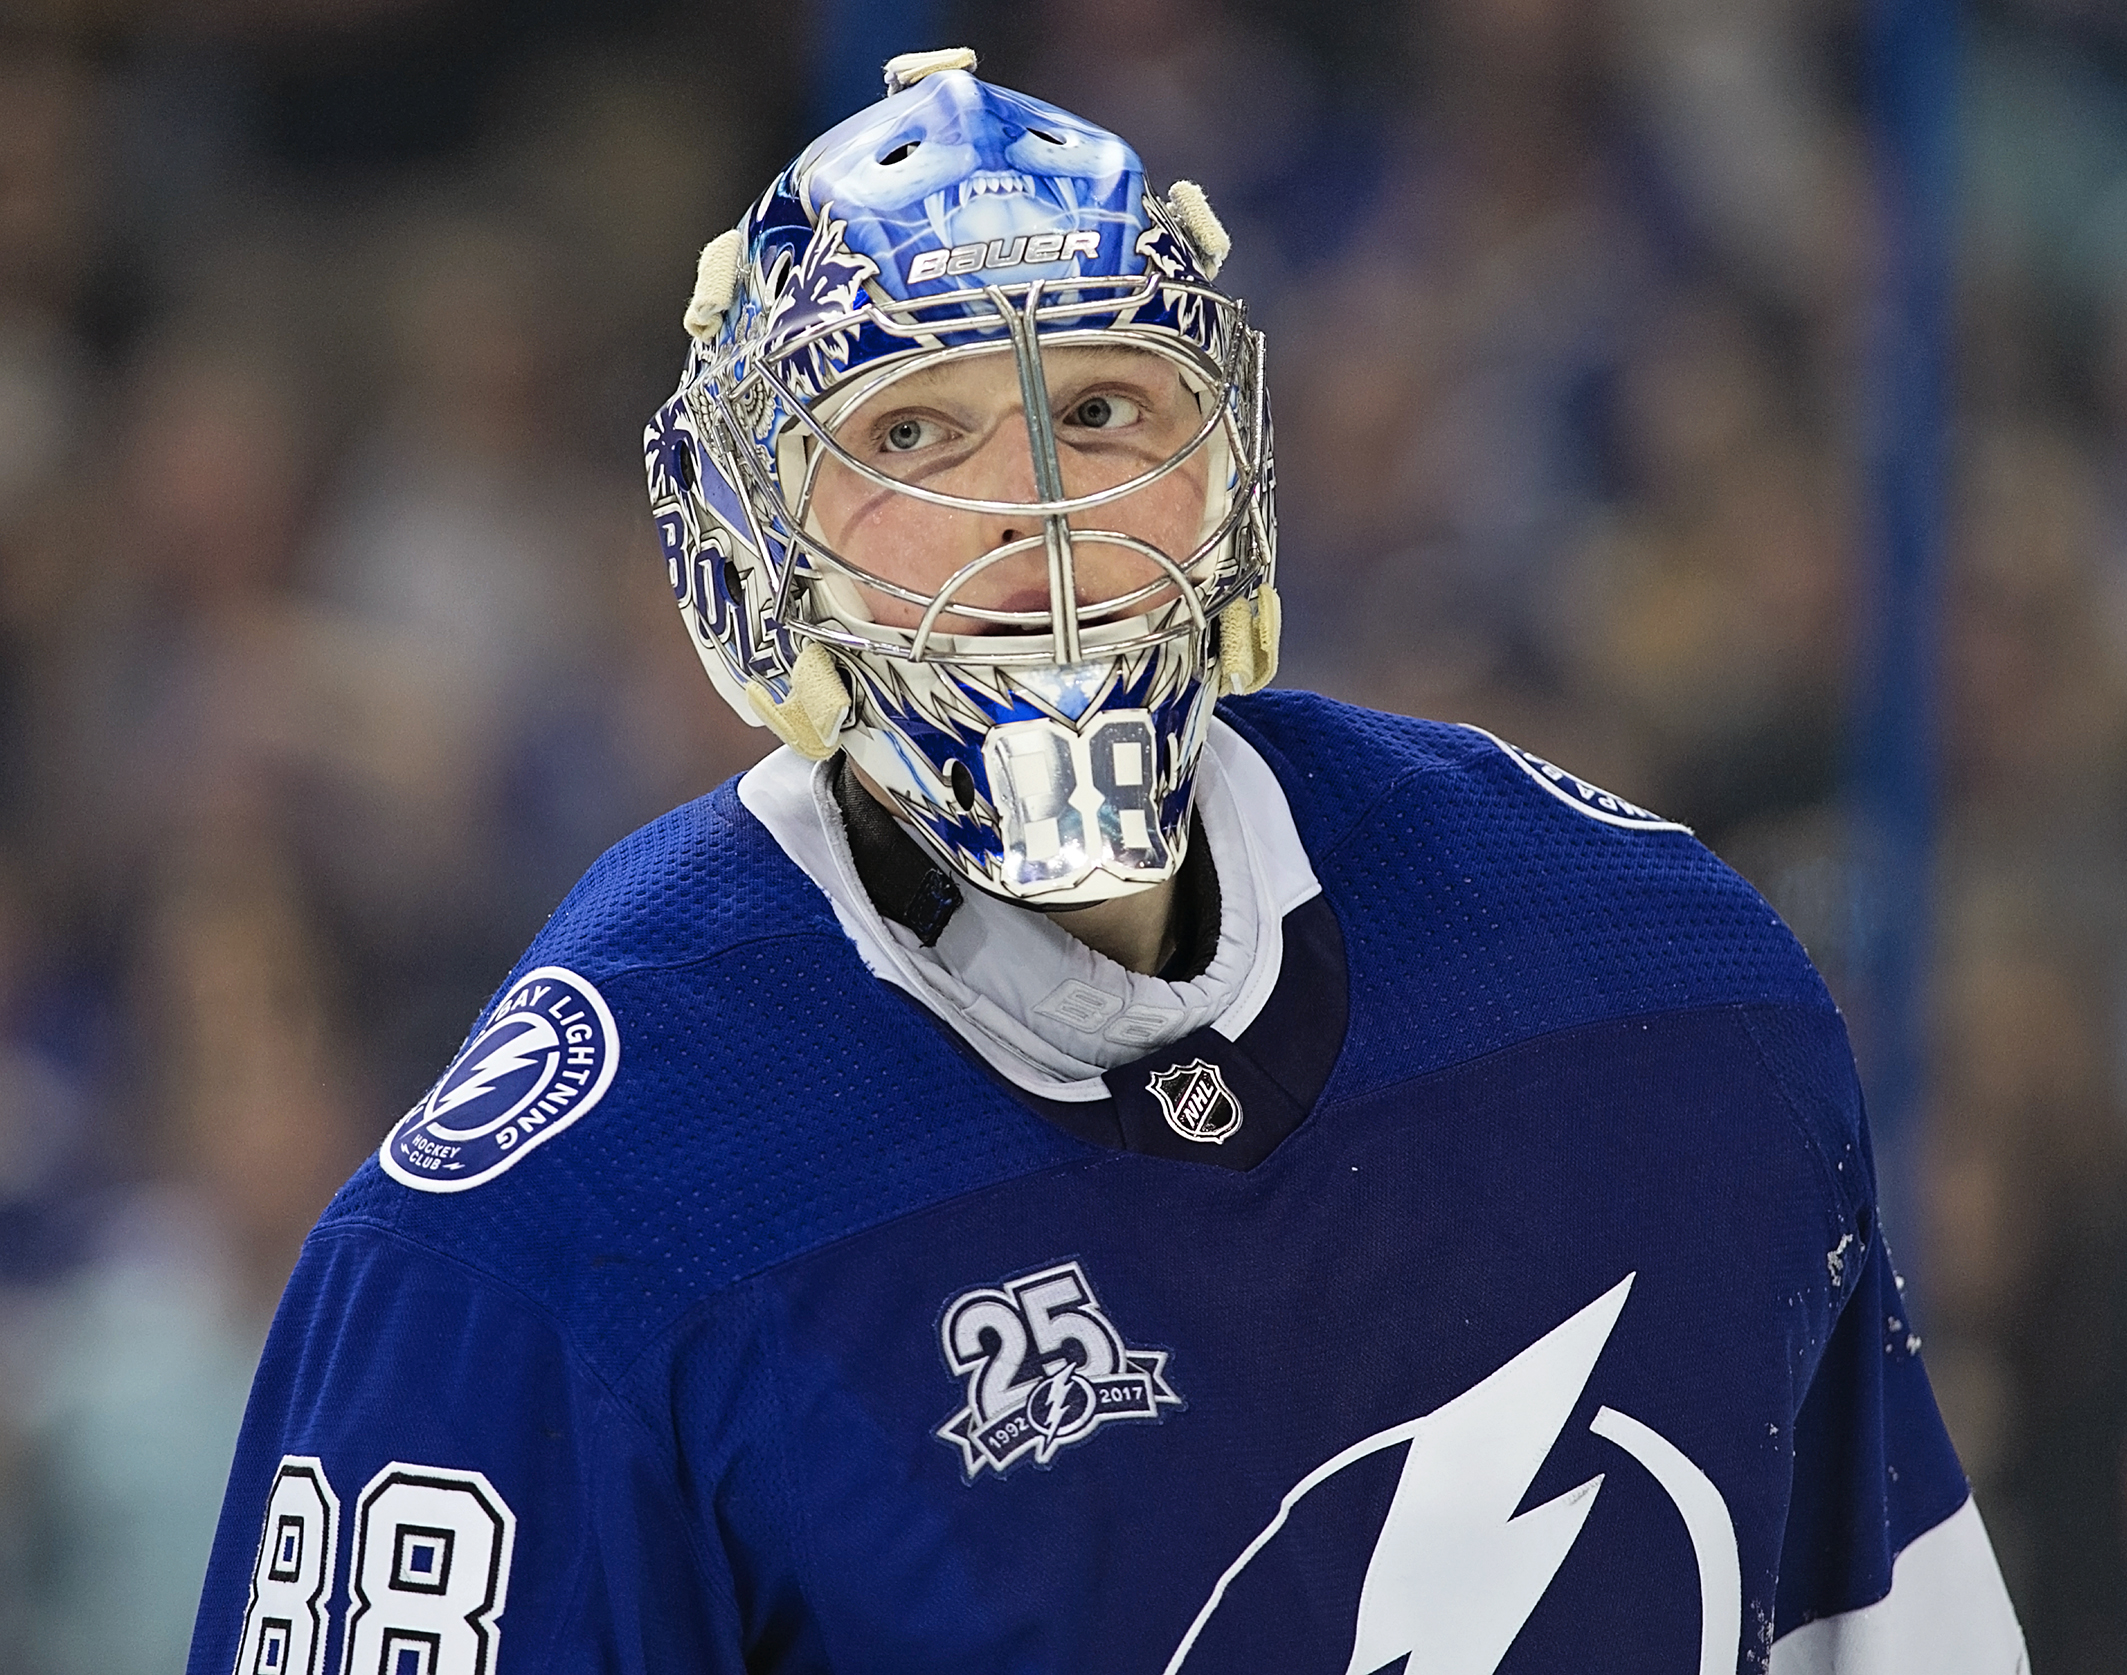 Vasilevskiy missed a chance to tie the franchise record for wins./CARMEN MANDATO